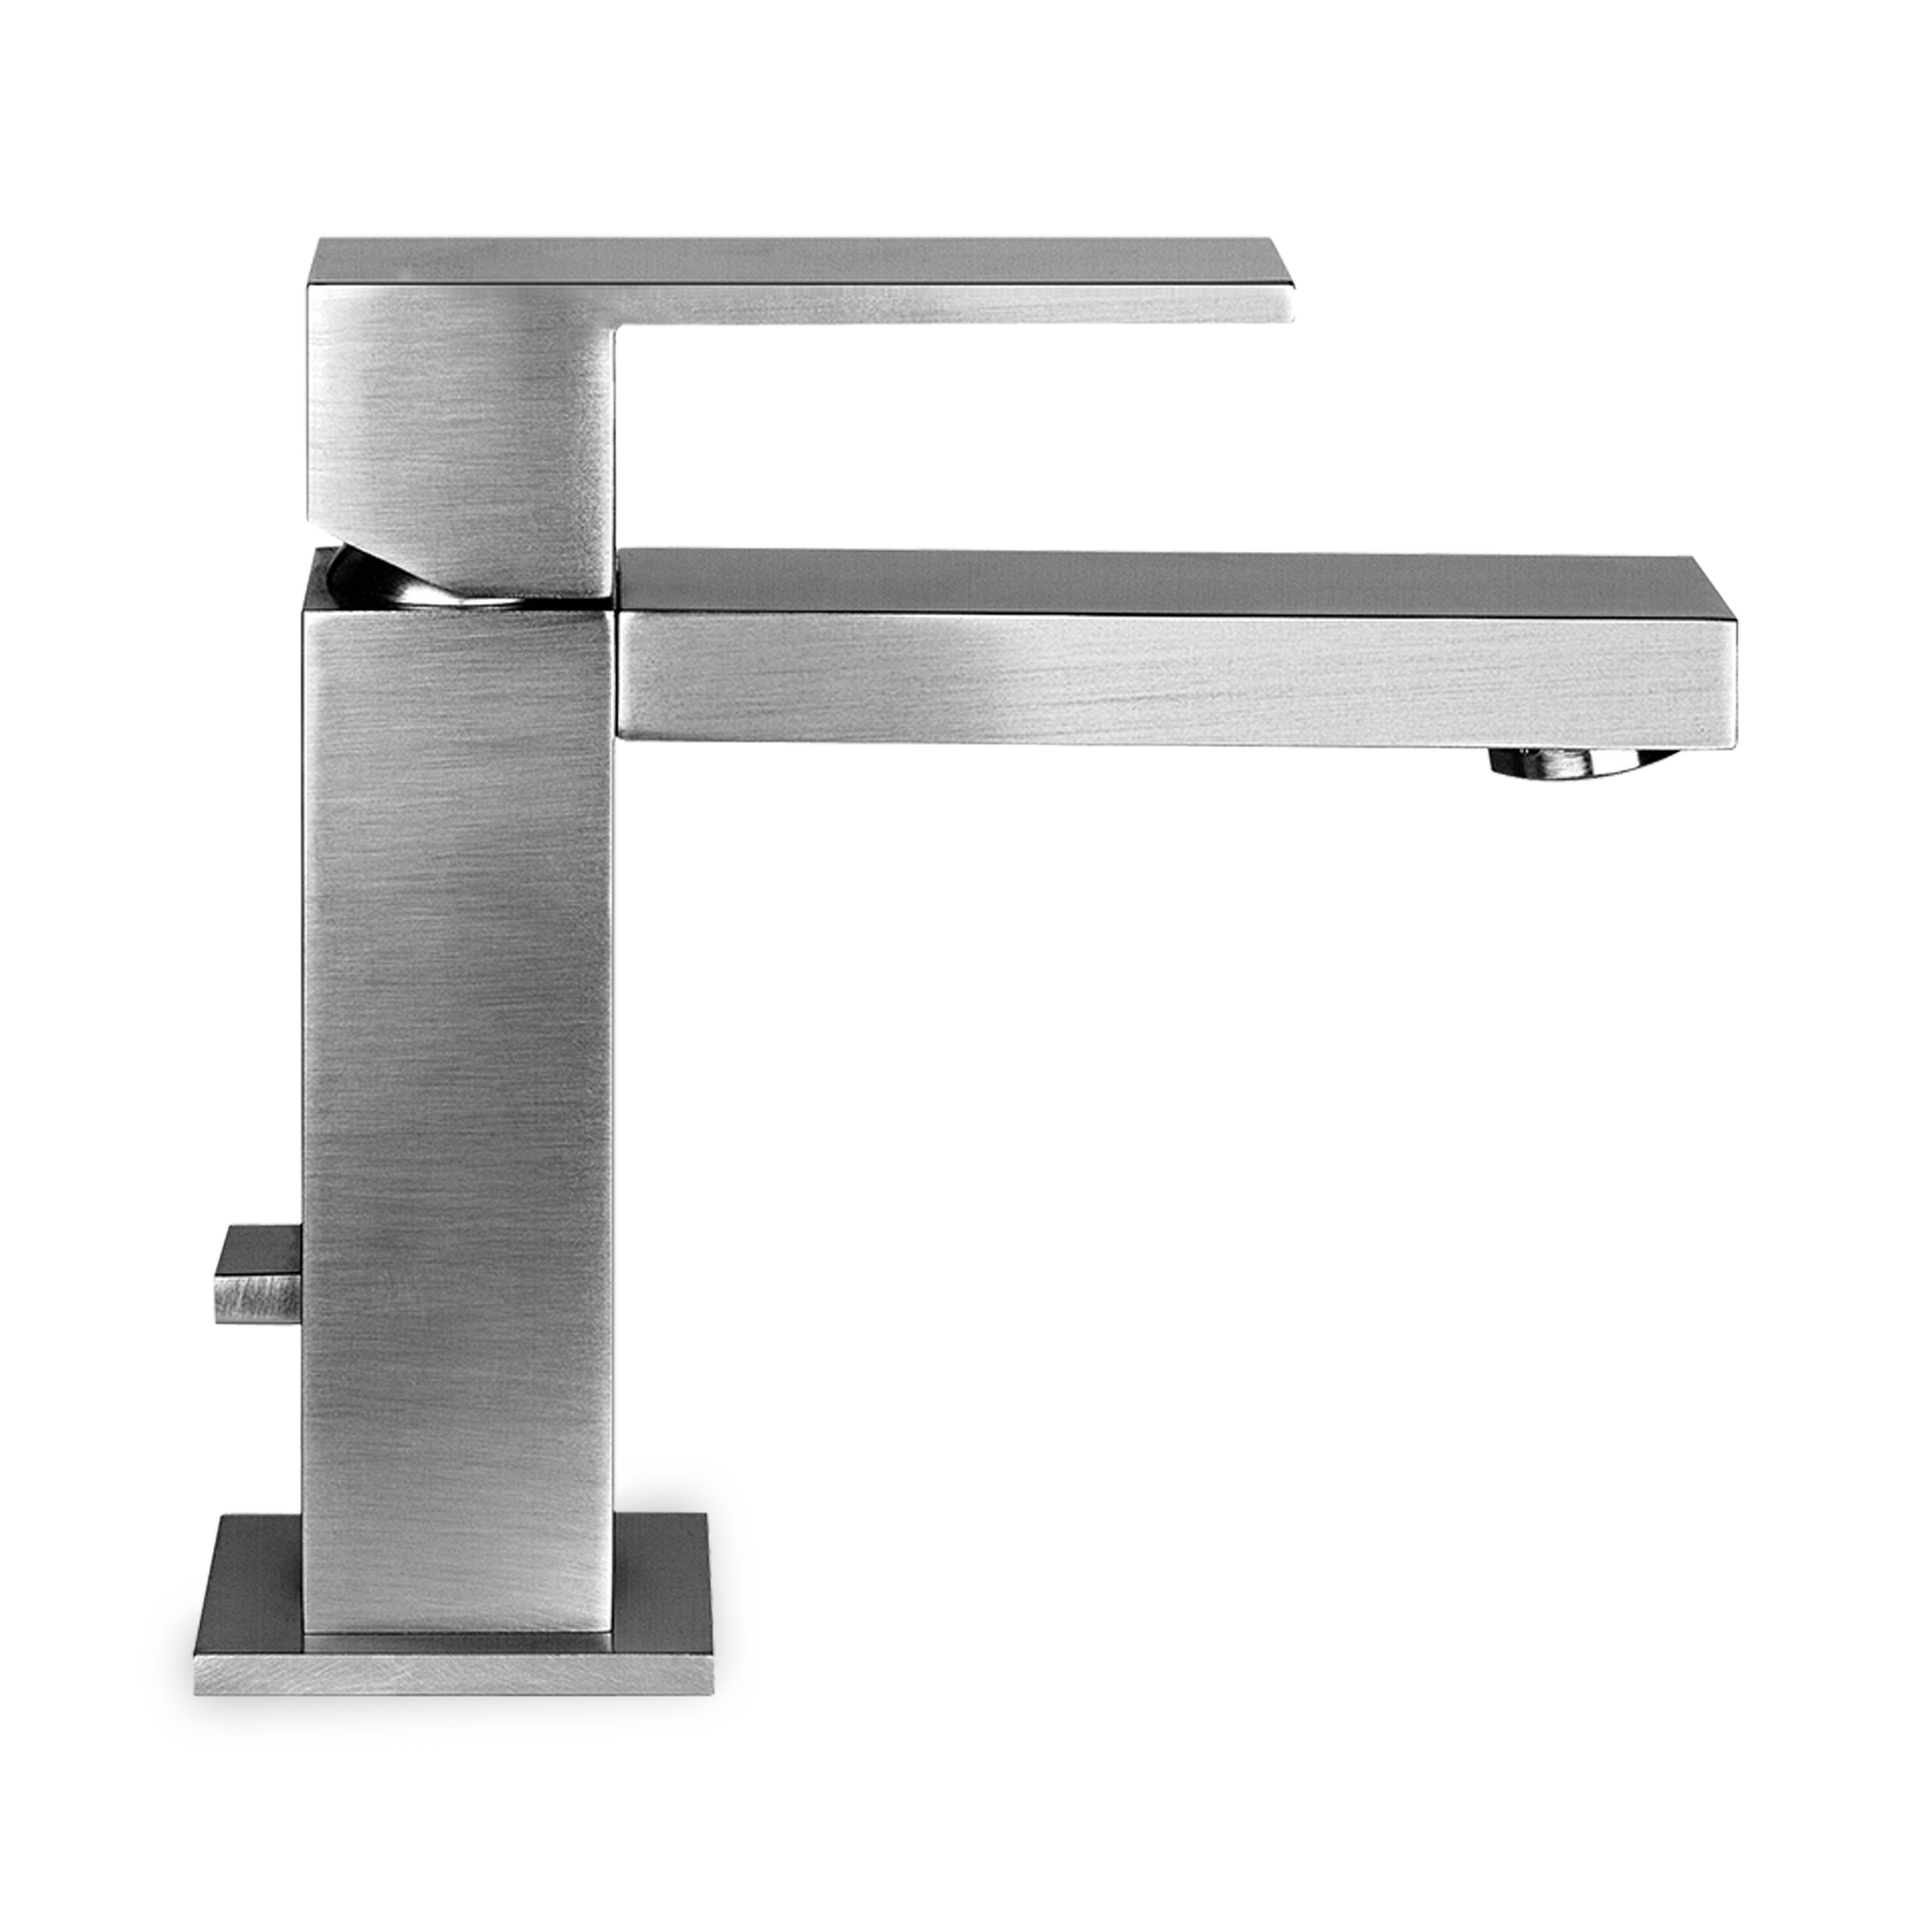 The Rettangolo faucet is a modern, sophisticated, basin faucet with sleek, defined edges and single-lever operation.